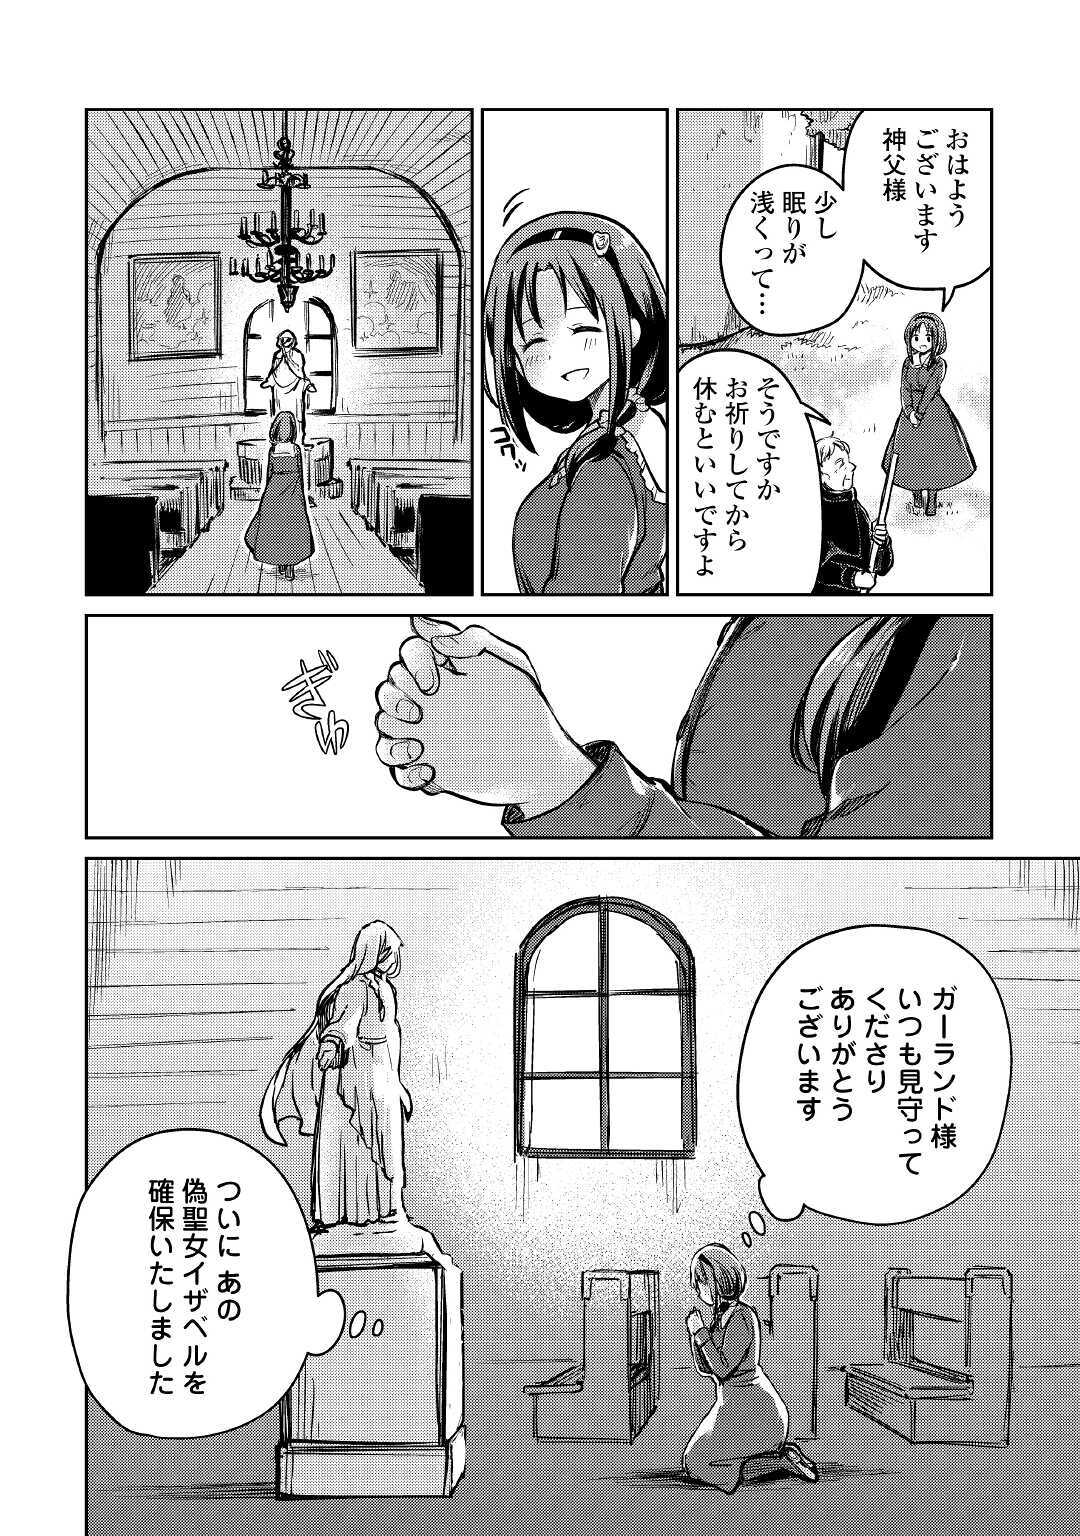 The Former Structural Researcher’s Story of Otherworldly Adventure 第34話 - Page 16